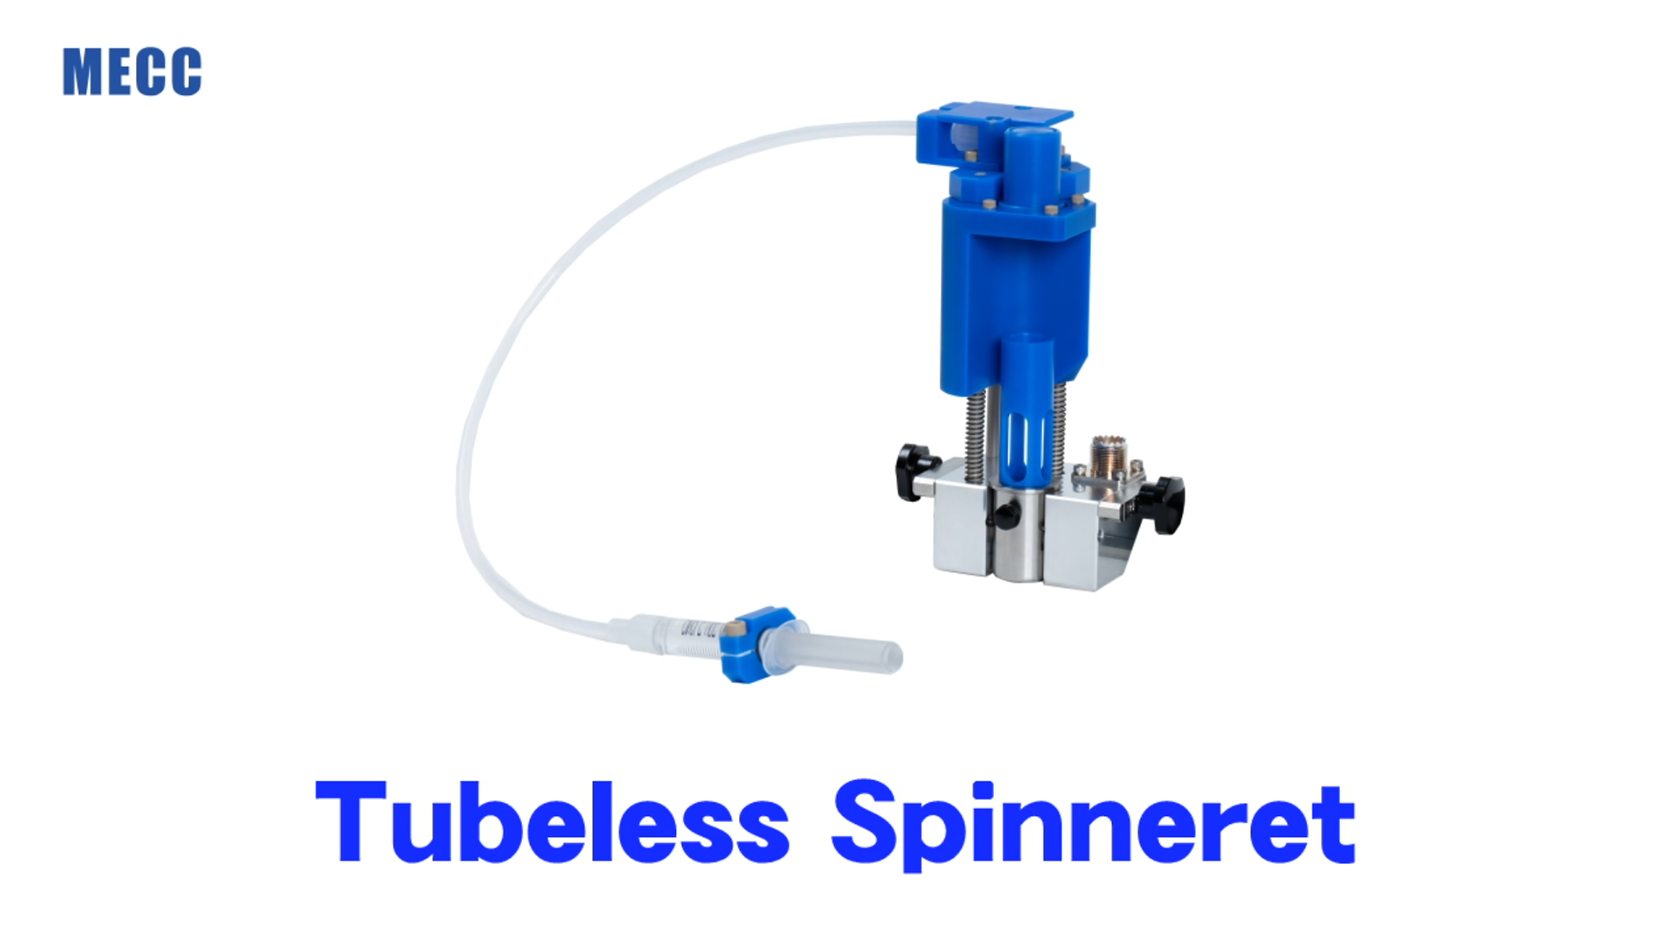 Can be spun with a small amount of solution!! Tubeless Spinneret.